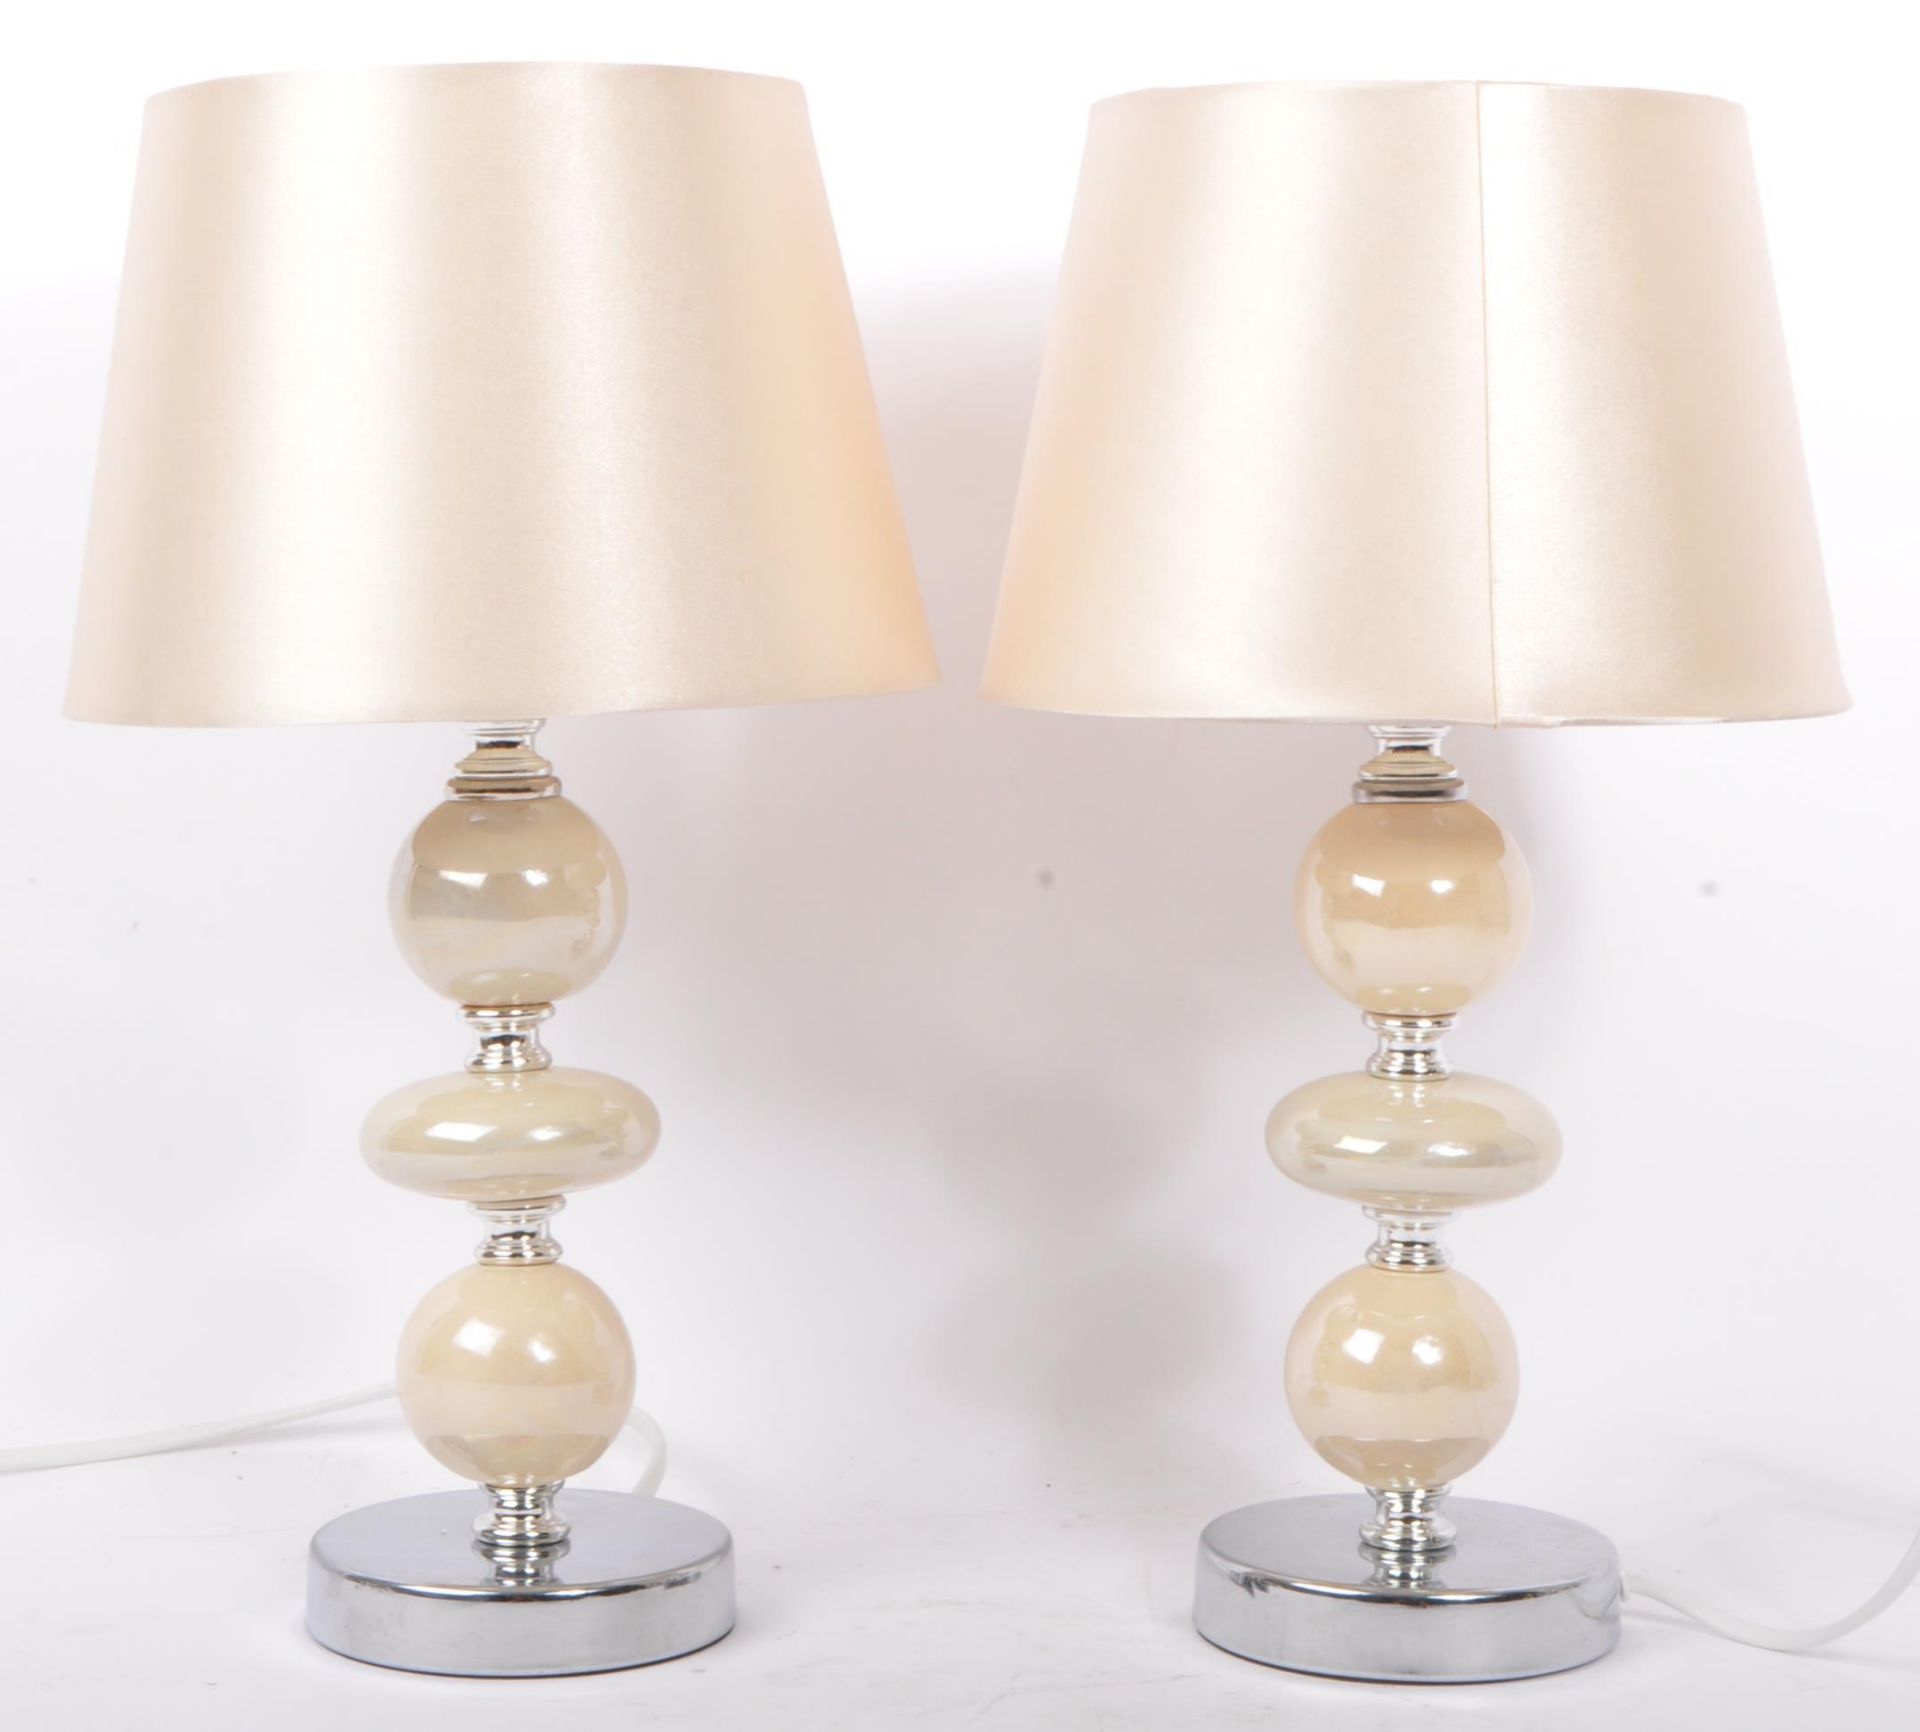 TWO PAIRS OF CONTEMPORARY TABLE LAMPS - Image 5 of 6